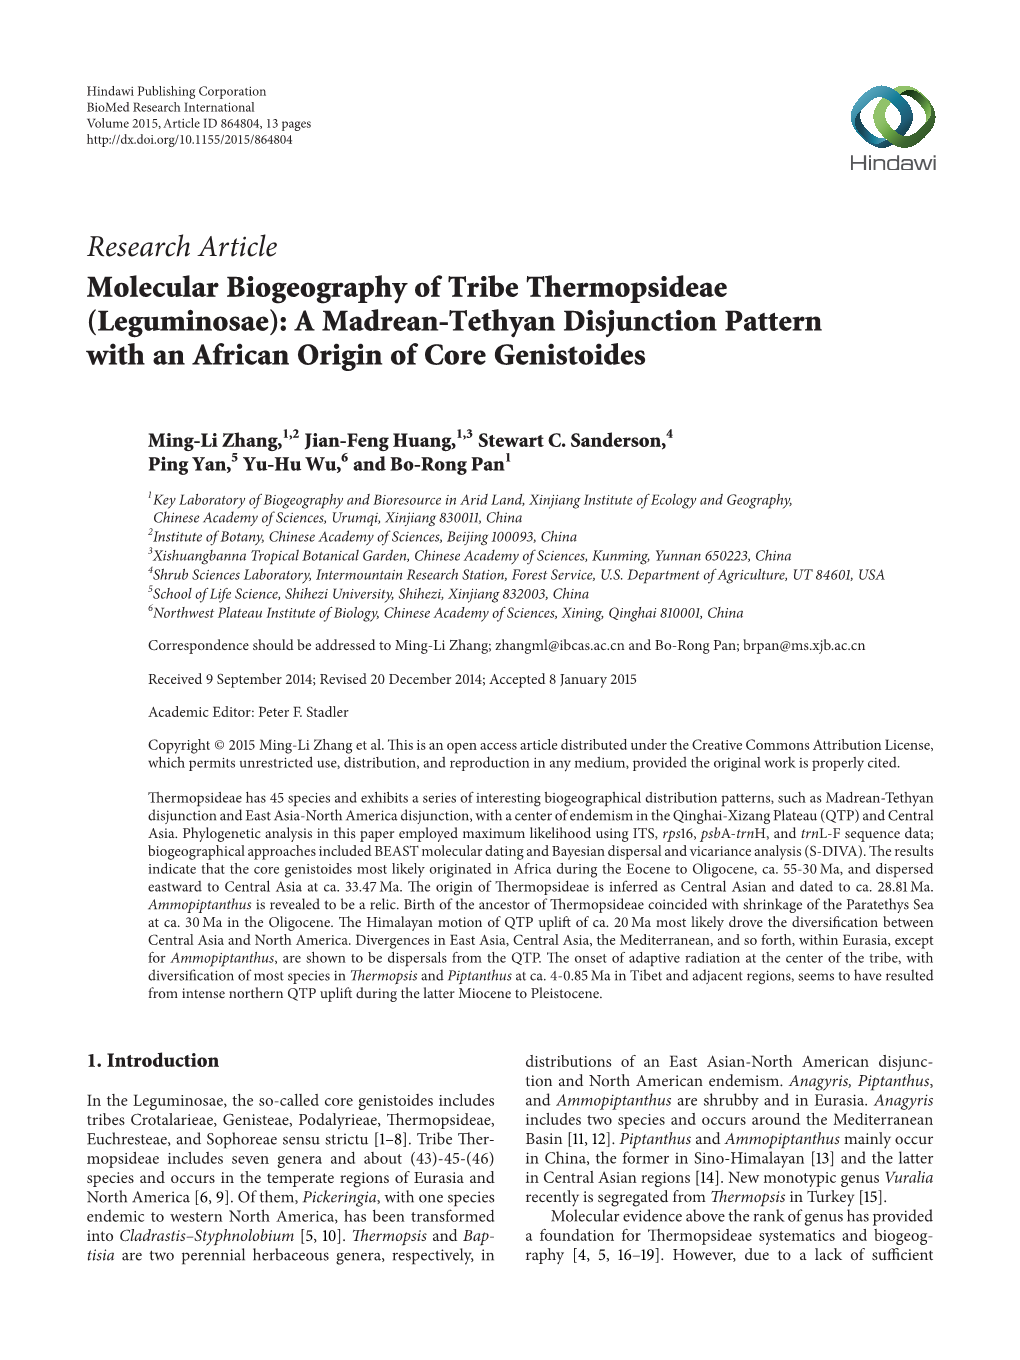 Molecular Biogeography of Tribe Thermopsideae (Leguminosae): a Madrean-Tethyan Disjunction Pattern with an African Origin of Core Genistoides